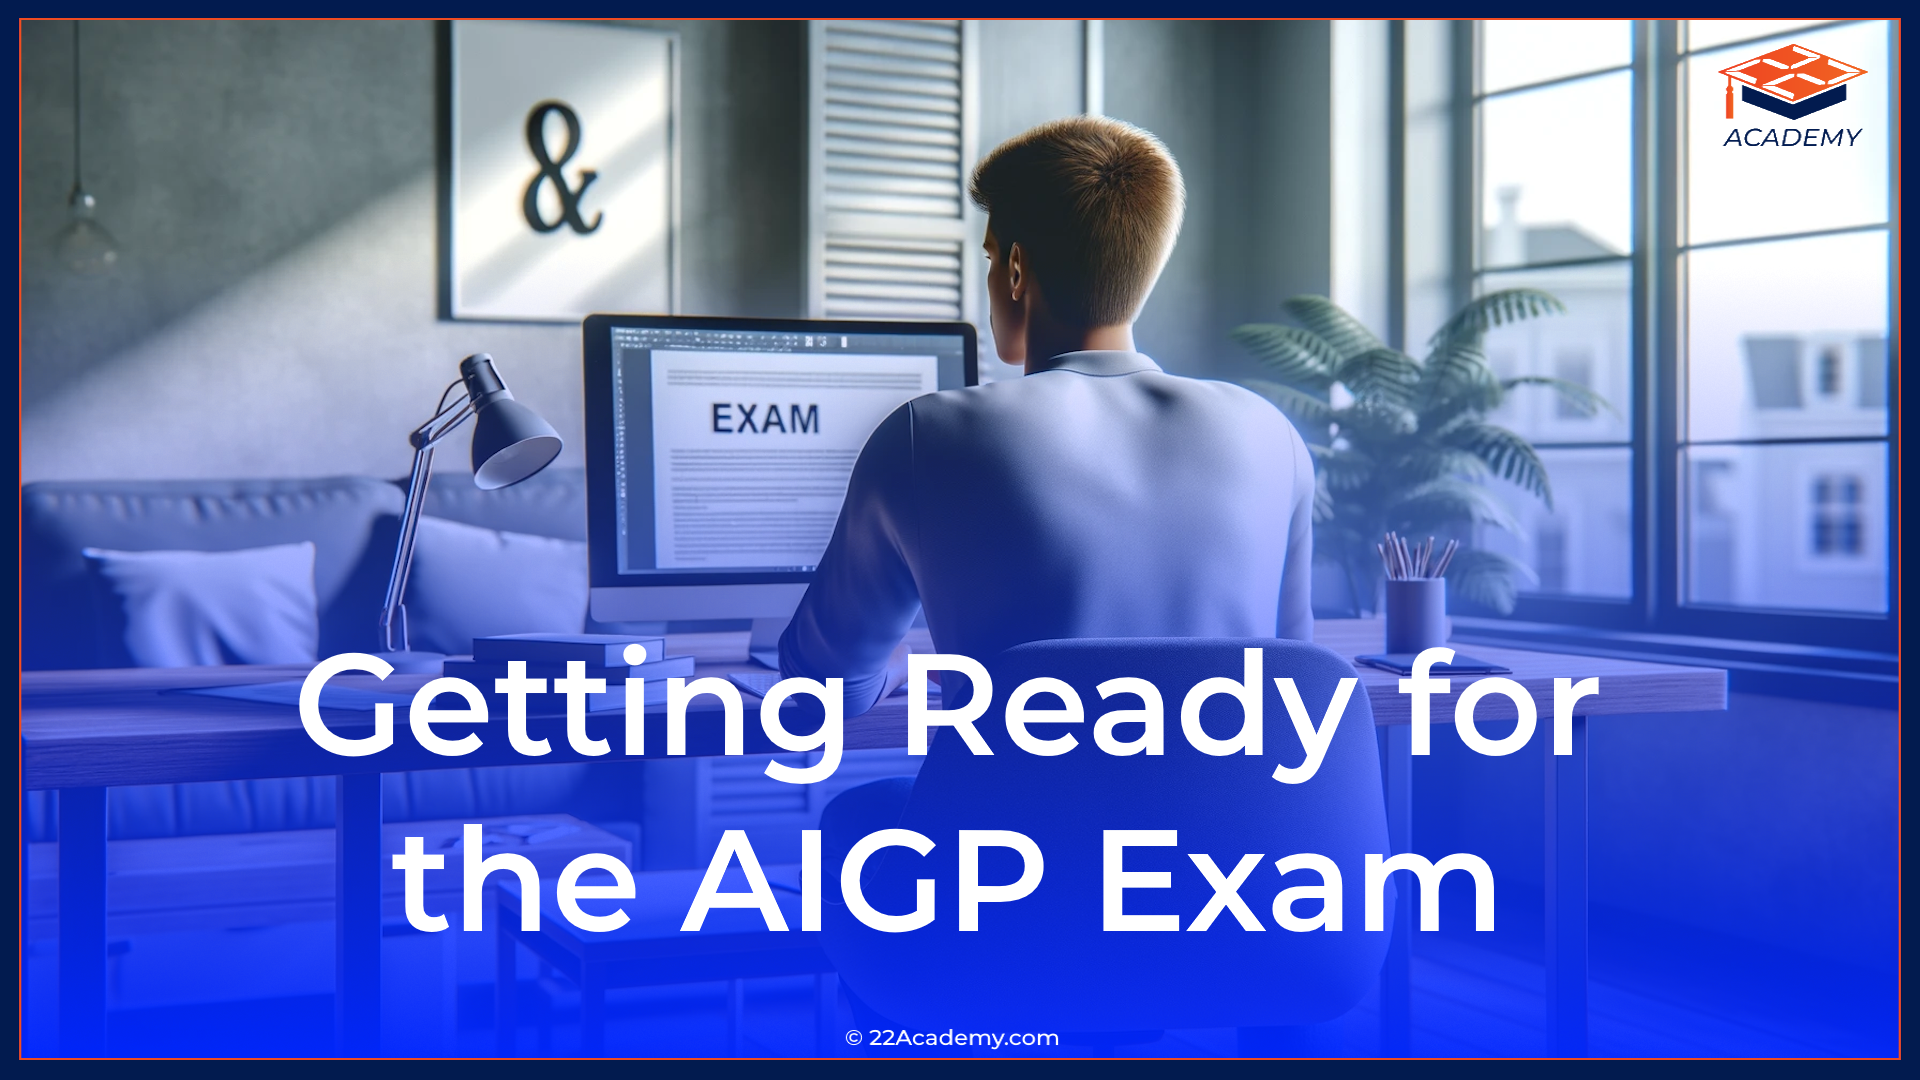 Getting Ready for the AIGP Exam